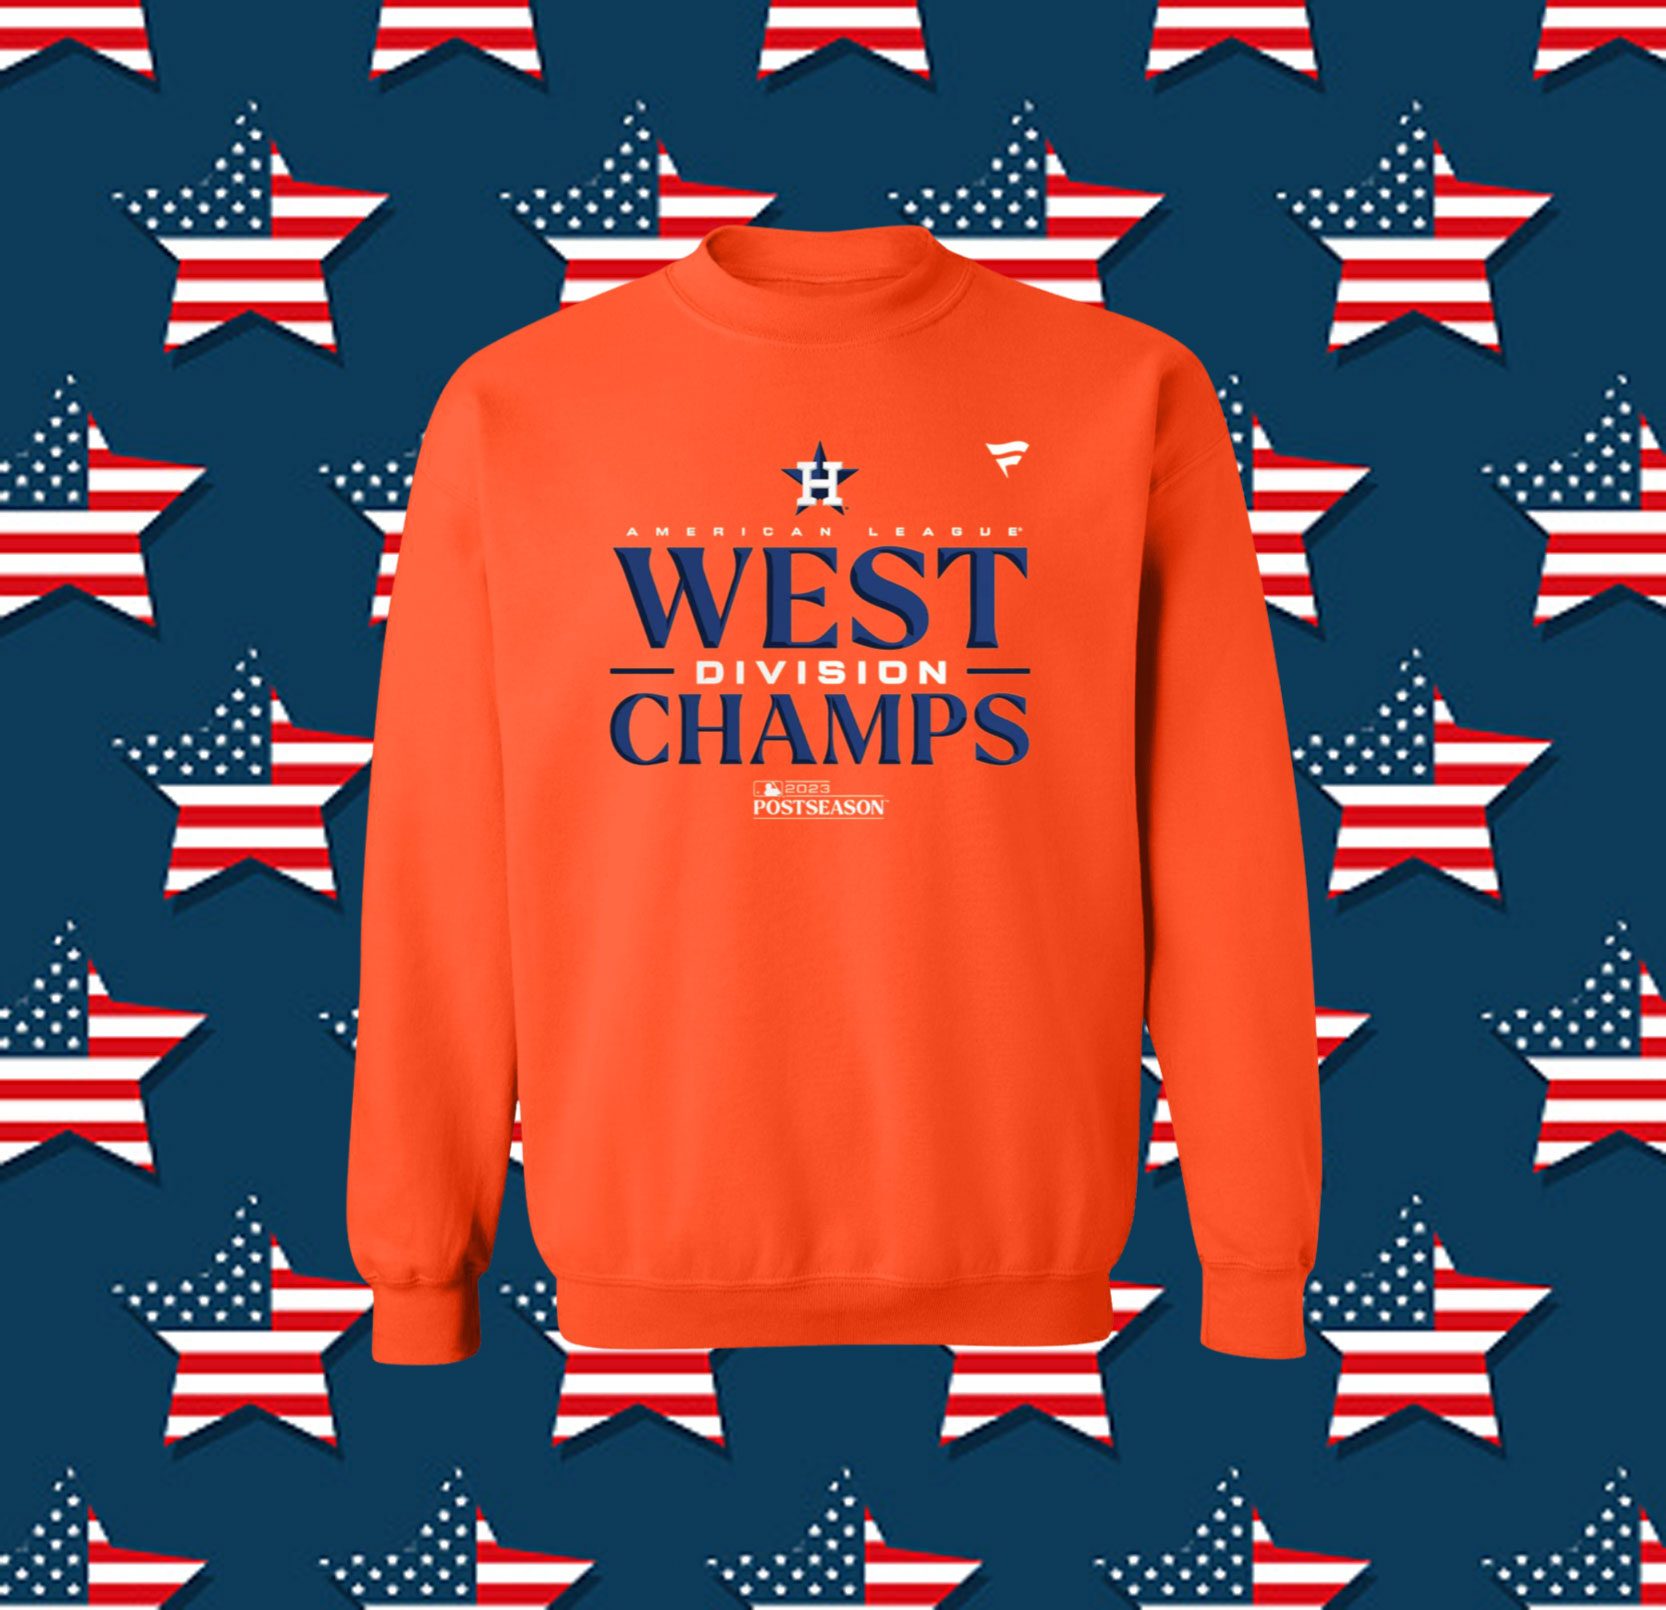 Astros Al West Champions 2023 T-Shirt - ReviewsTees